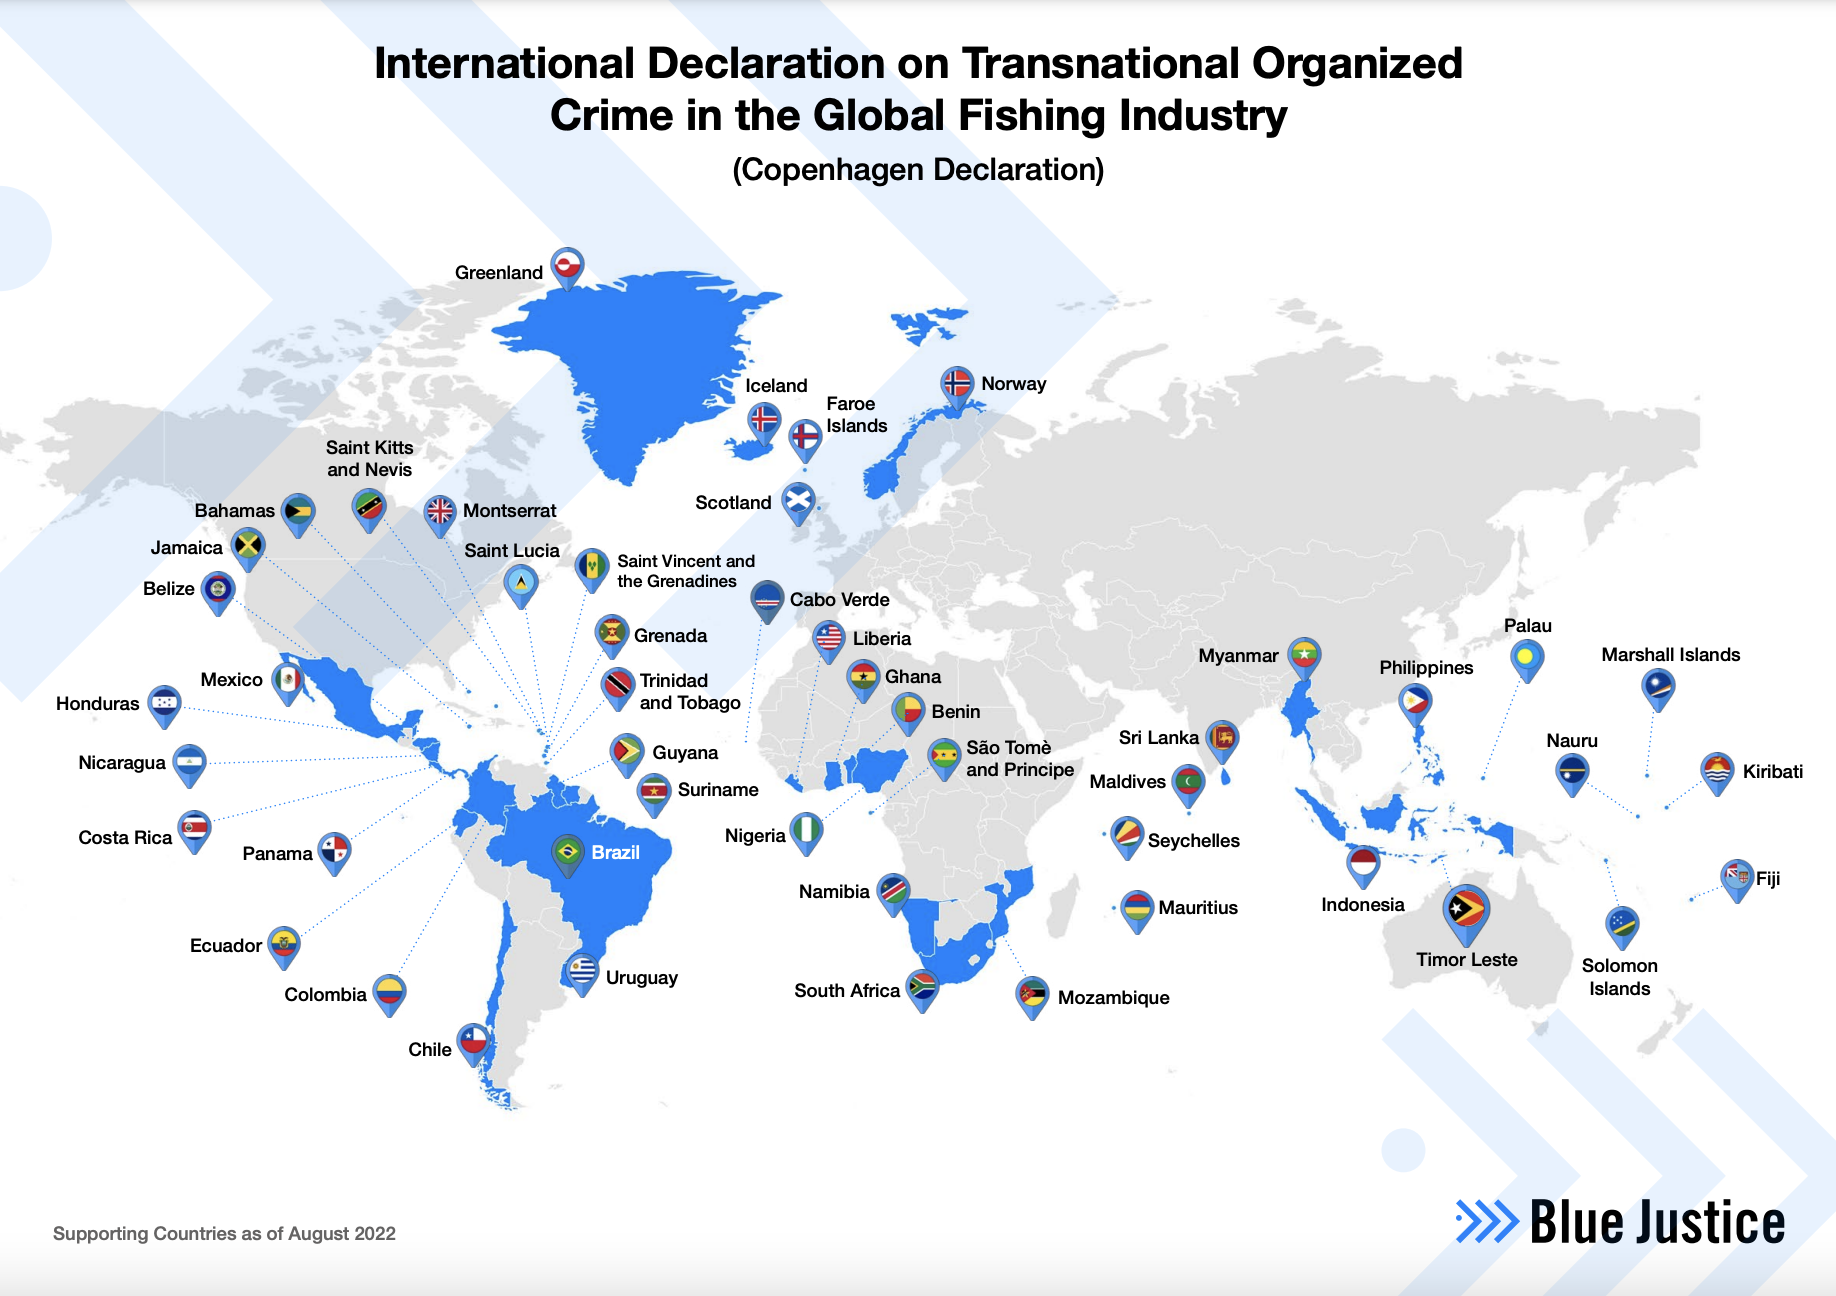 Participating Countries in the International Declaration on Transnational Organized Crime in the Global Fishing Industry © Blue Justice Initiative